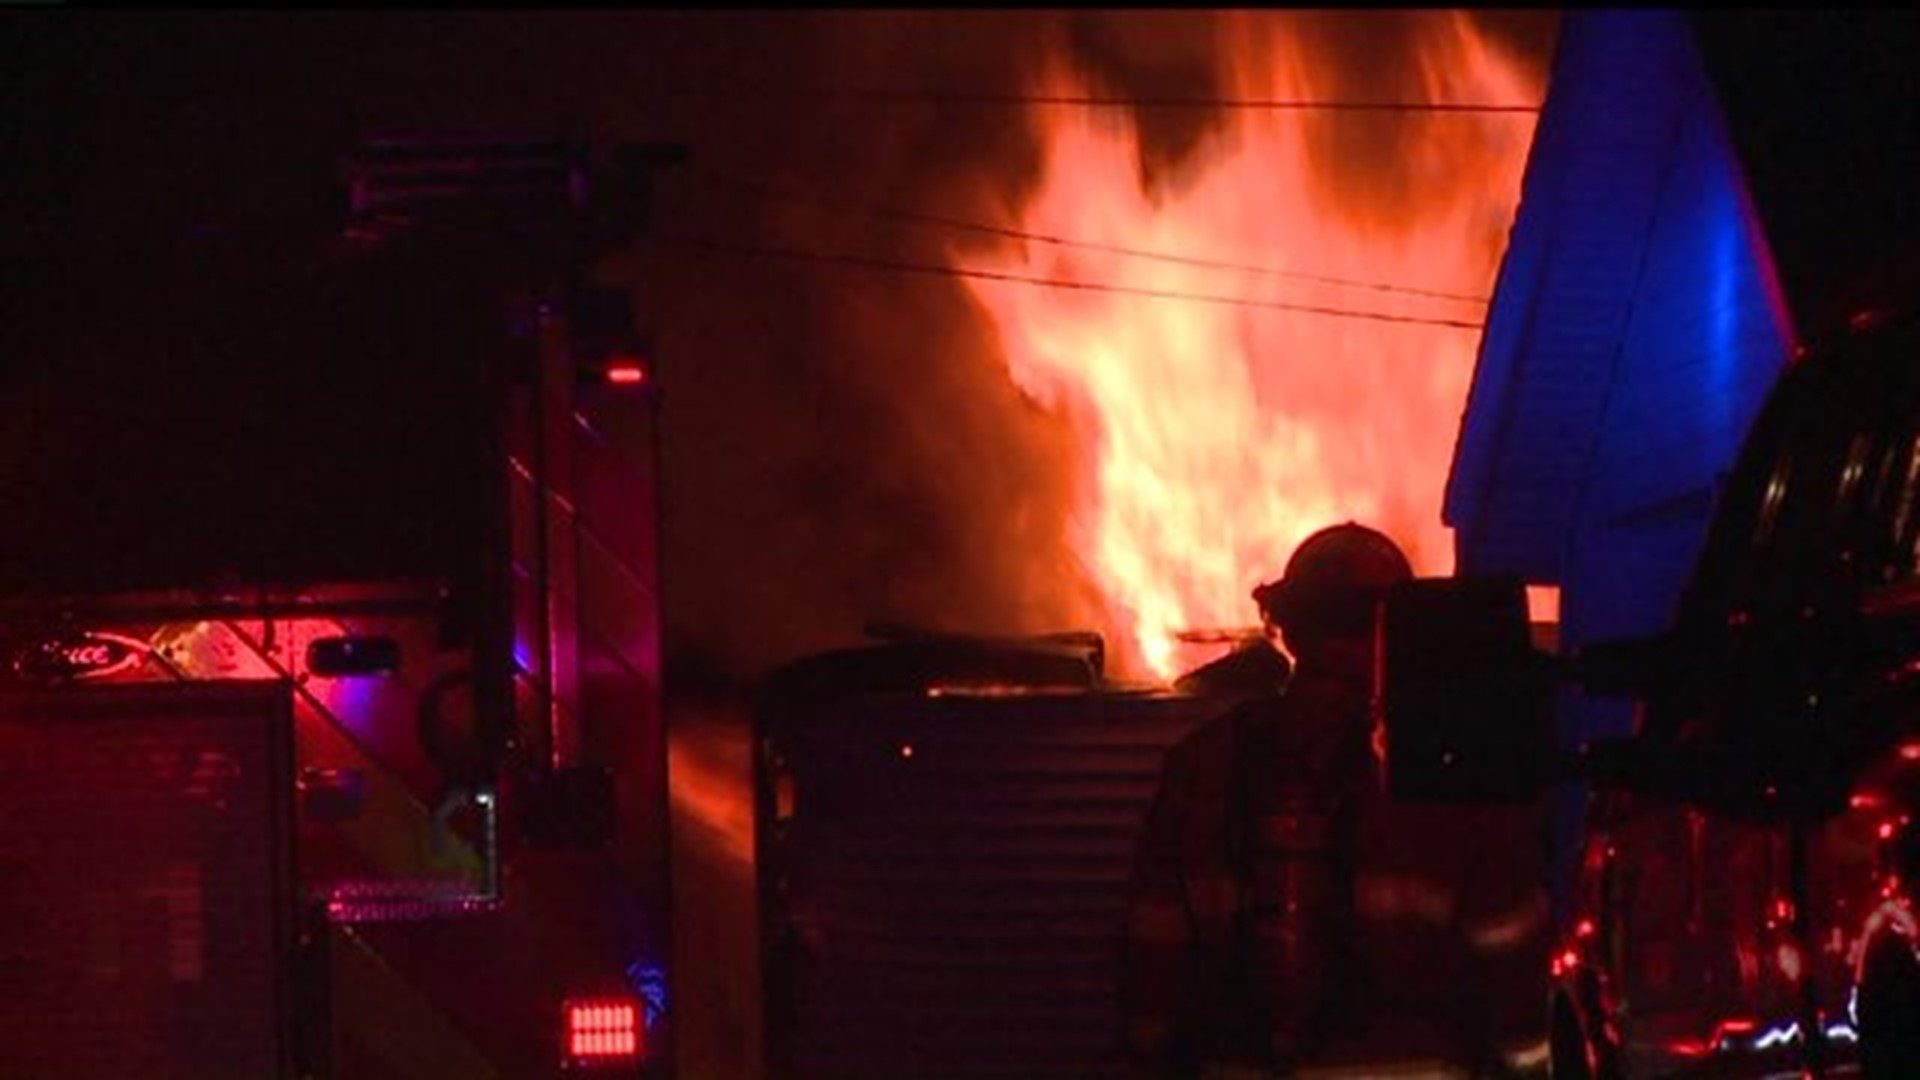 Two garages and utility pole catch fire in Moline